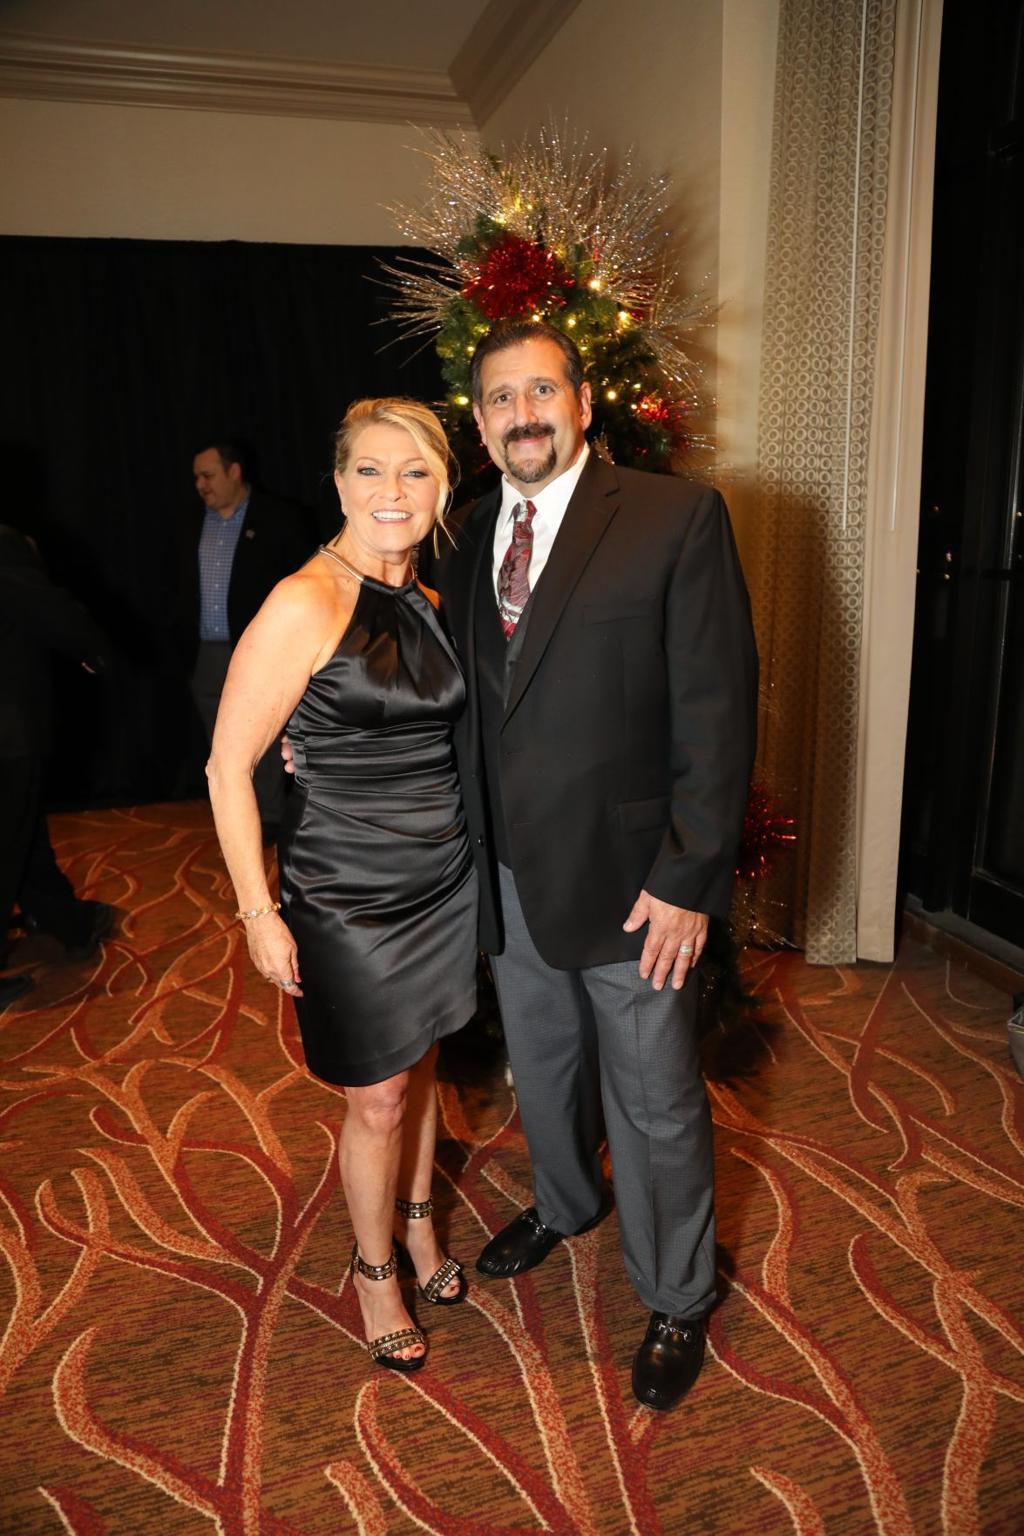 St. Louis Cardinals Albert Pujols amd wife Diedra pose for a photograph at  the Second Annual Pujols Family Foundation Gala in Clayton, Missouri on  December 8, 2006. The dinner and auction raises